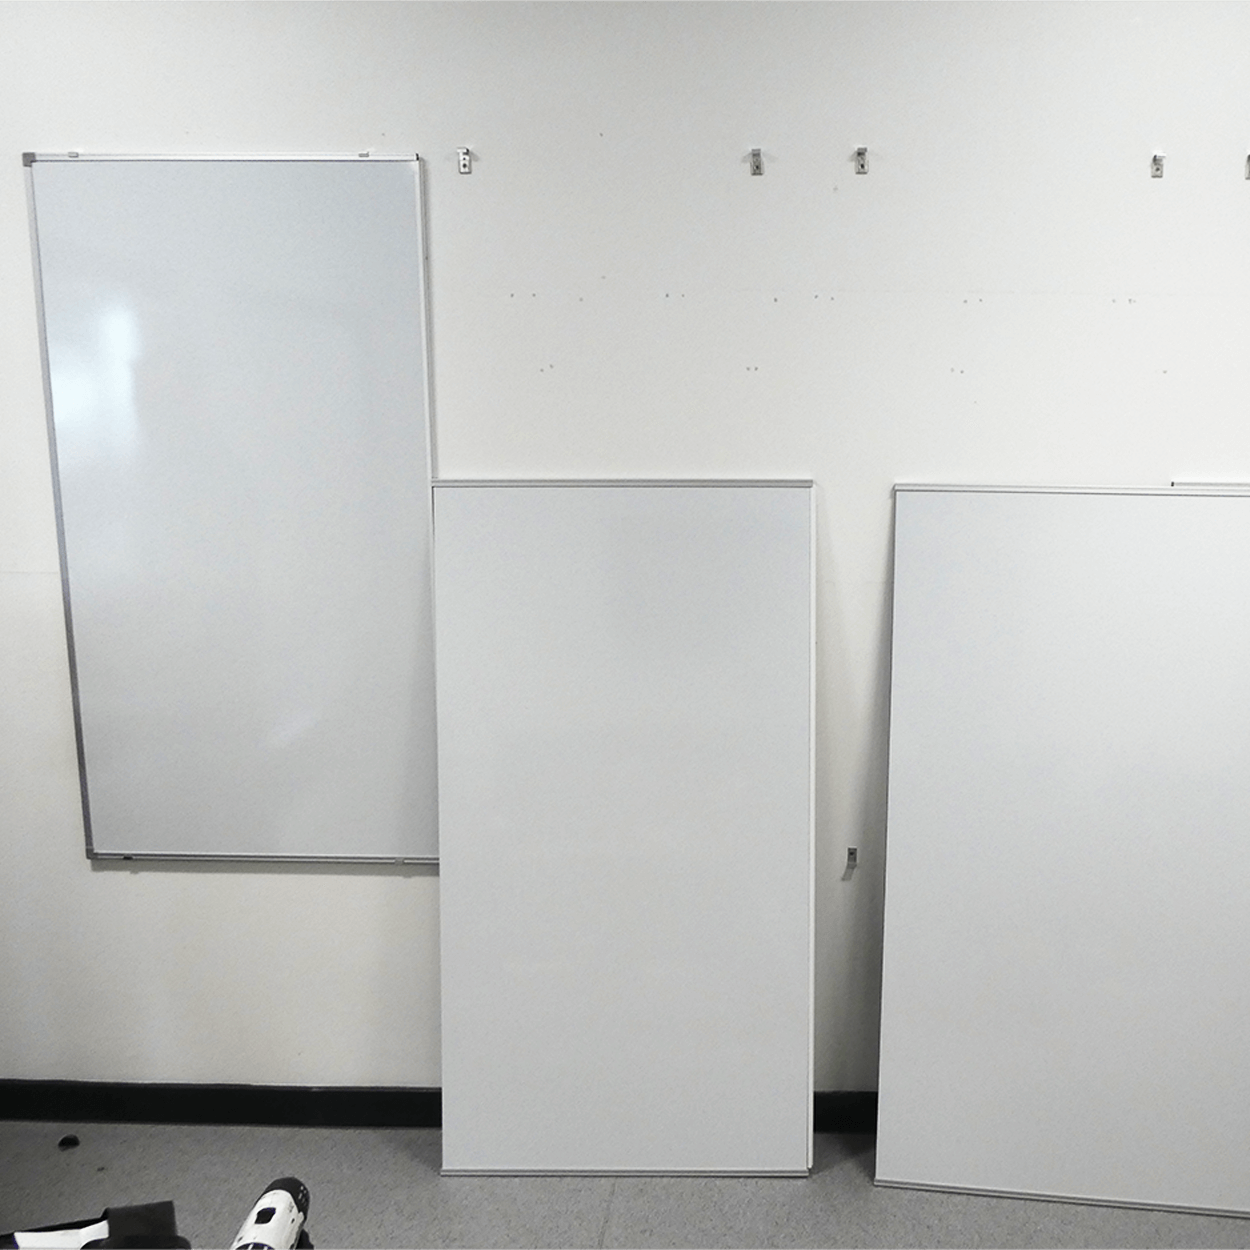 How To: Create a Large Magnetic Whiteboard Wall